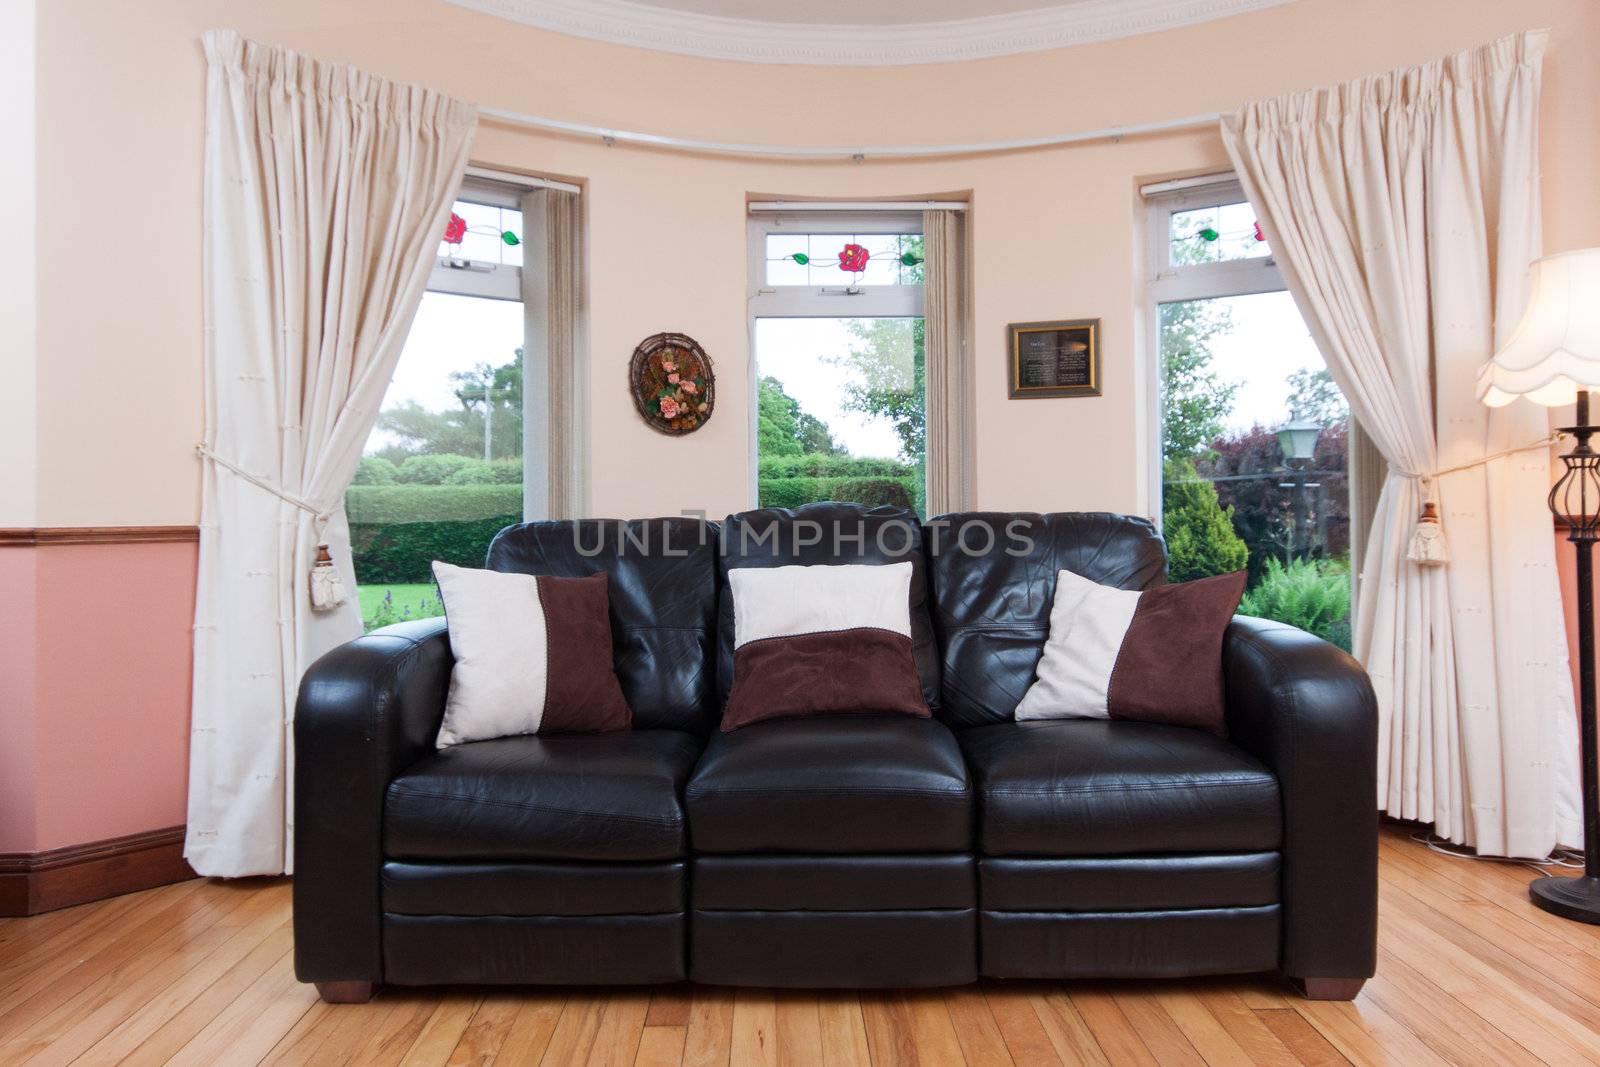 Photo of a black couch with a view to the garden.